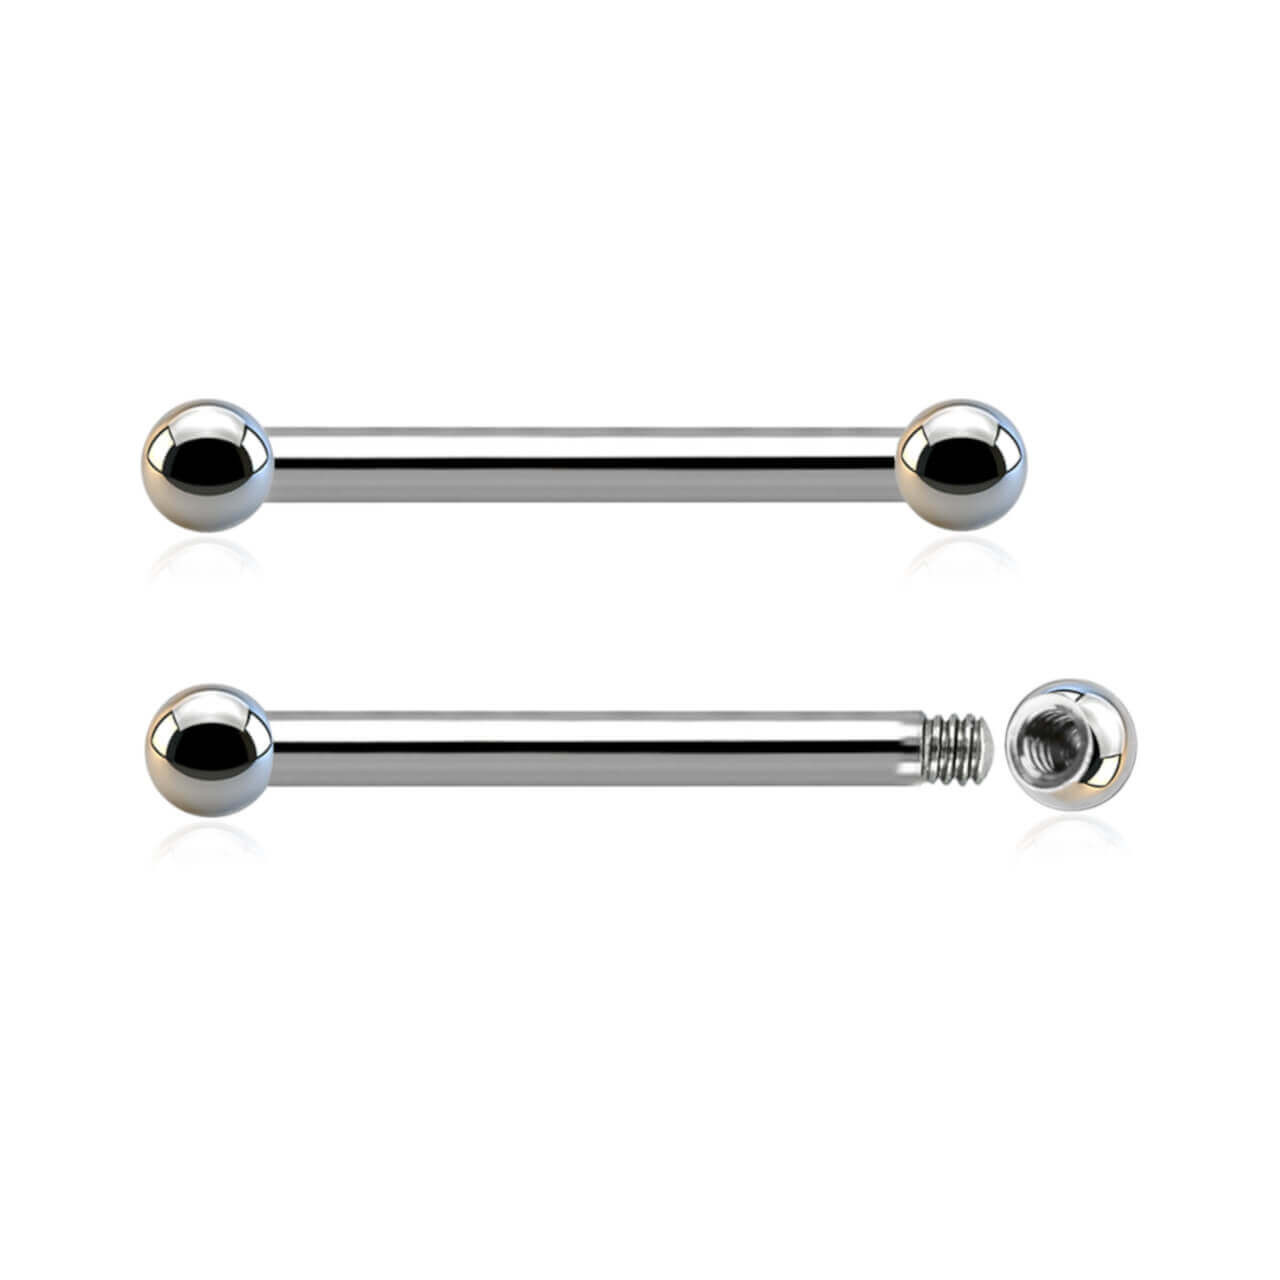 SBA16B3 Wholesale Assortment of 25 surgical steel nipple barbells, Thickness 1.6mm, Ball size 3mm